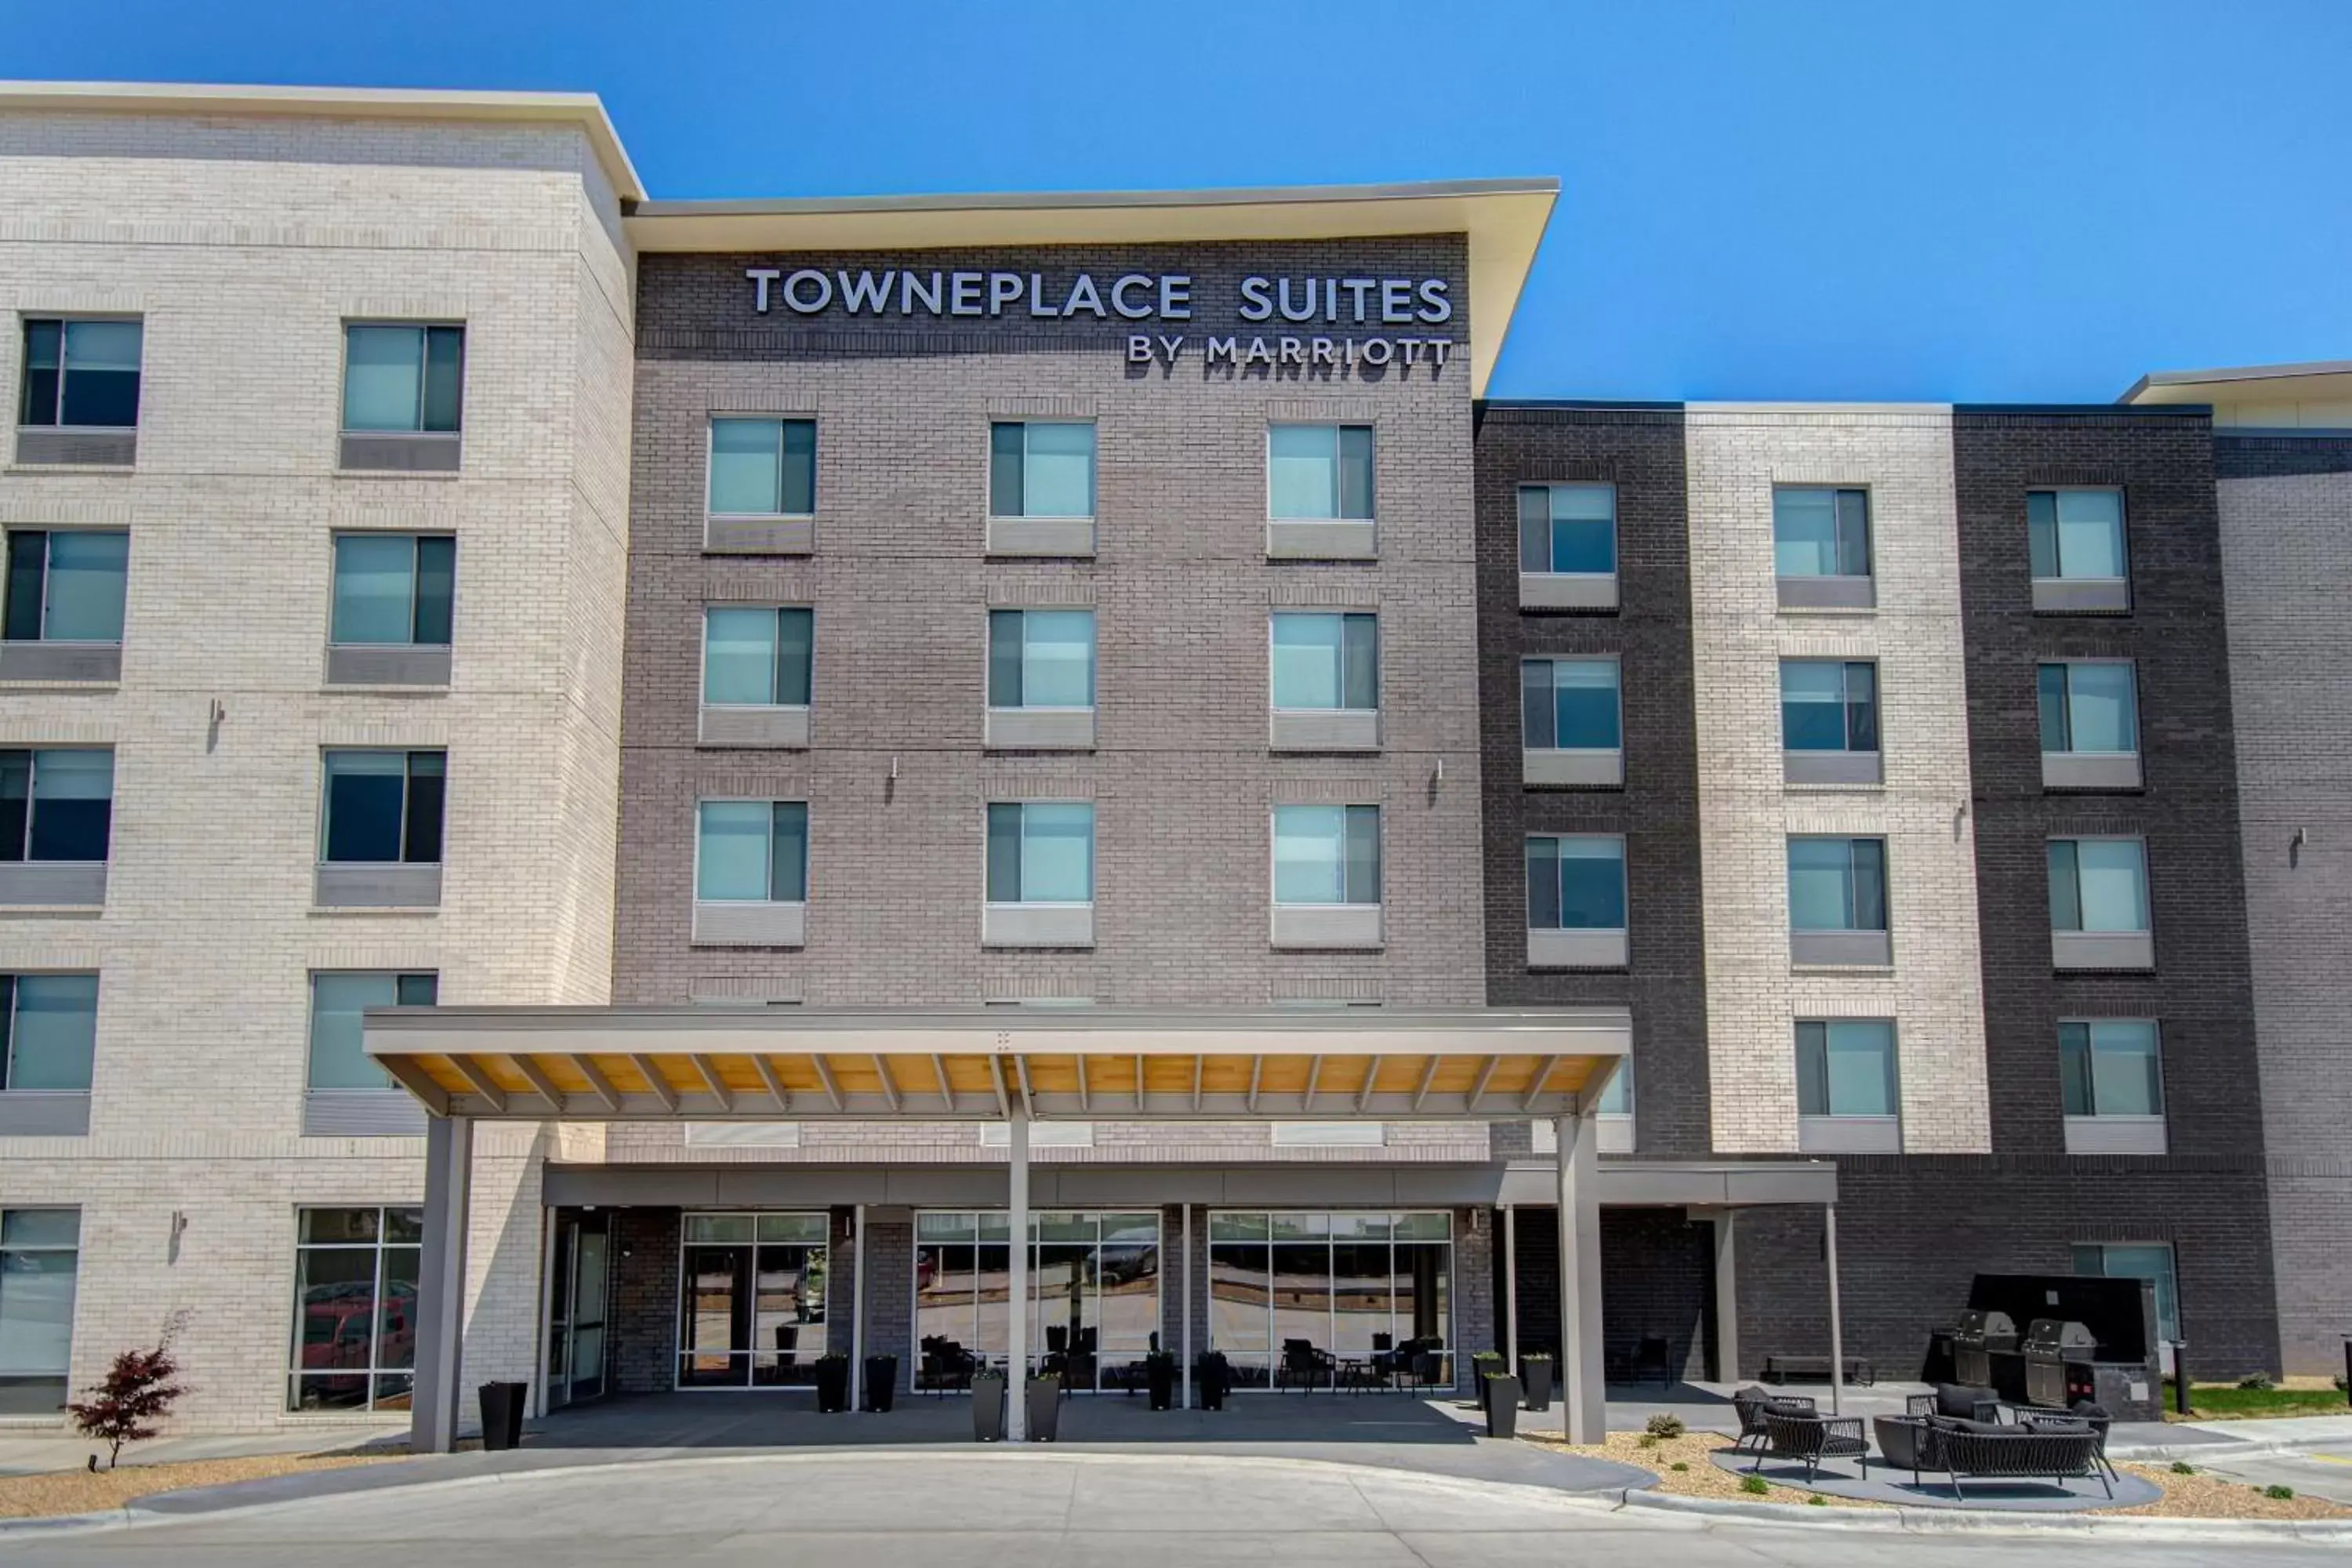 Property Building in TownePlace Suites by Marriott Cincinnati Airport South